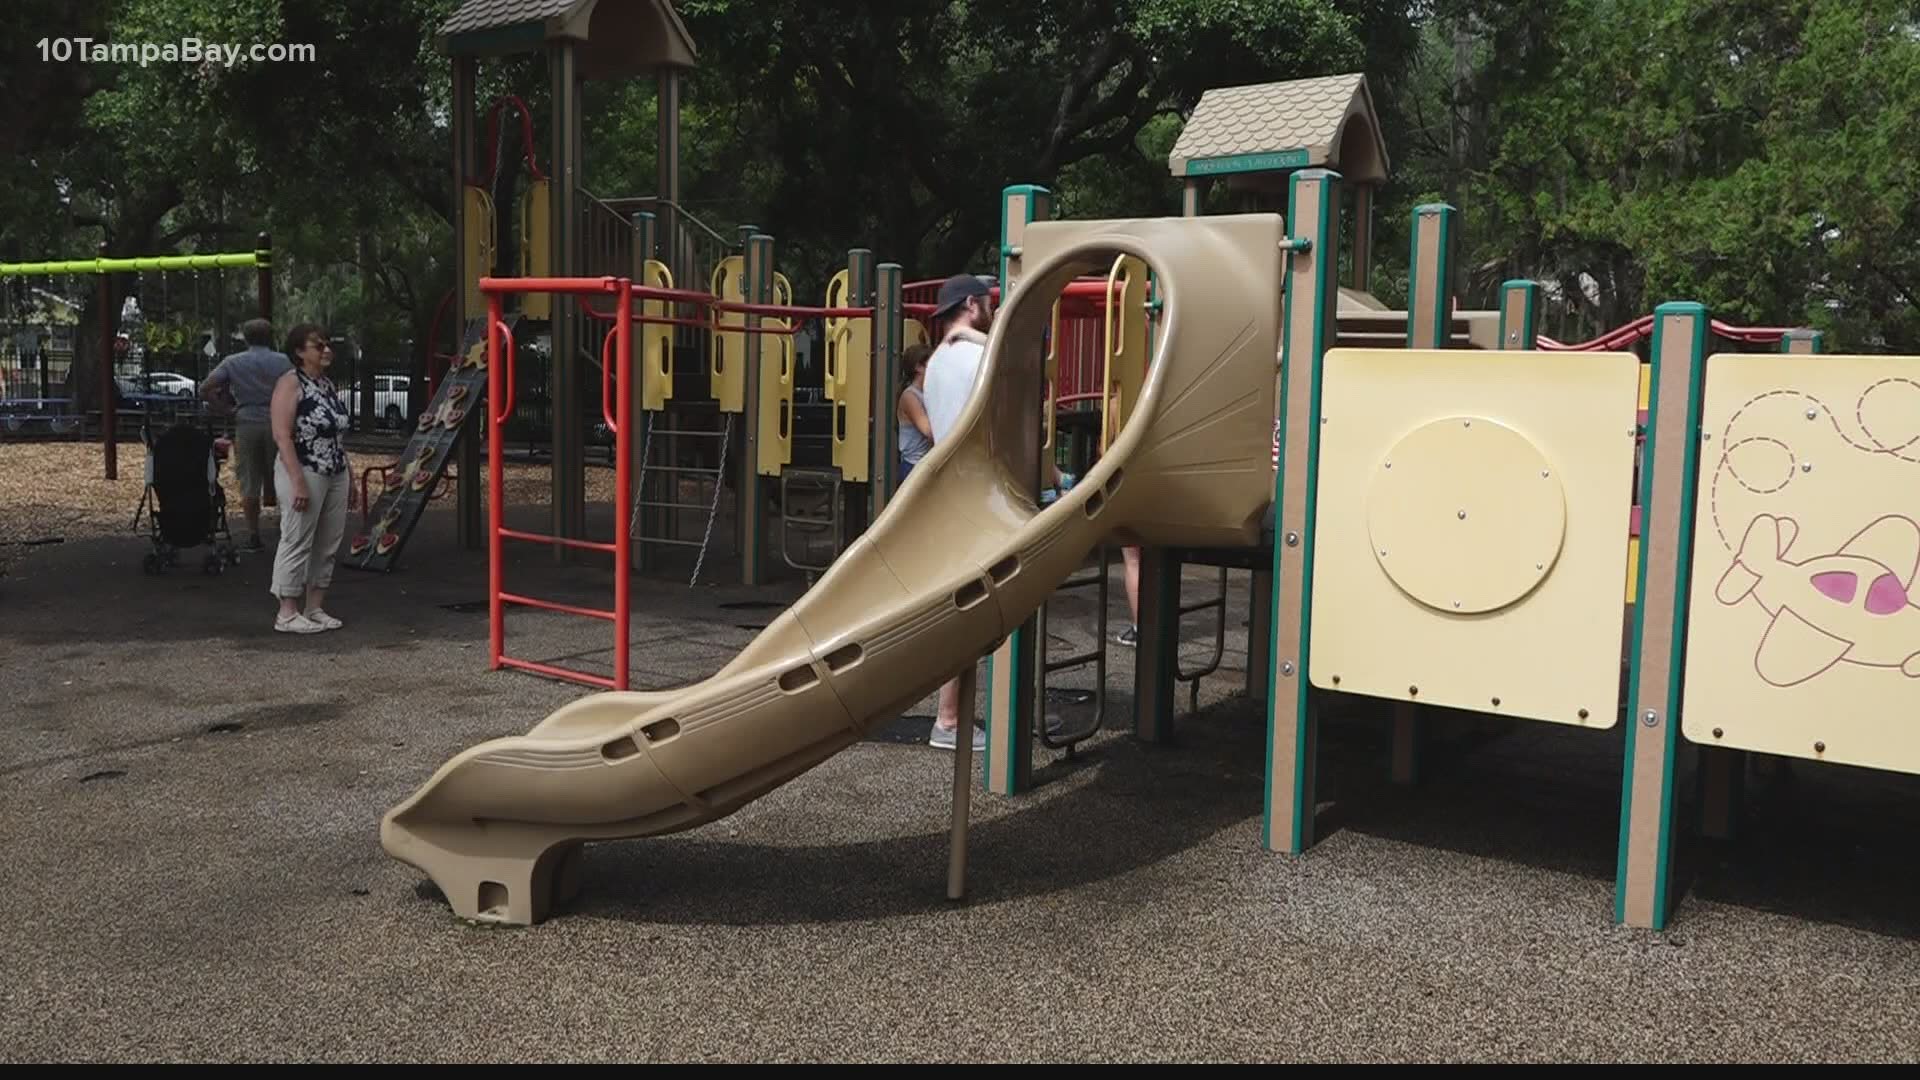 Even on an 80-degree day, a plastic slide can easily warm up to 160 degrees Fahrenheit.